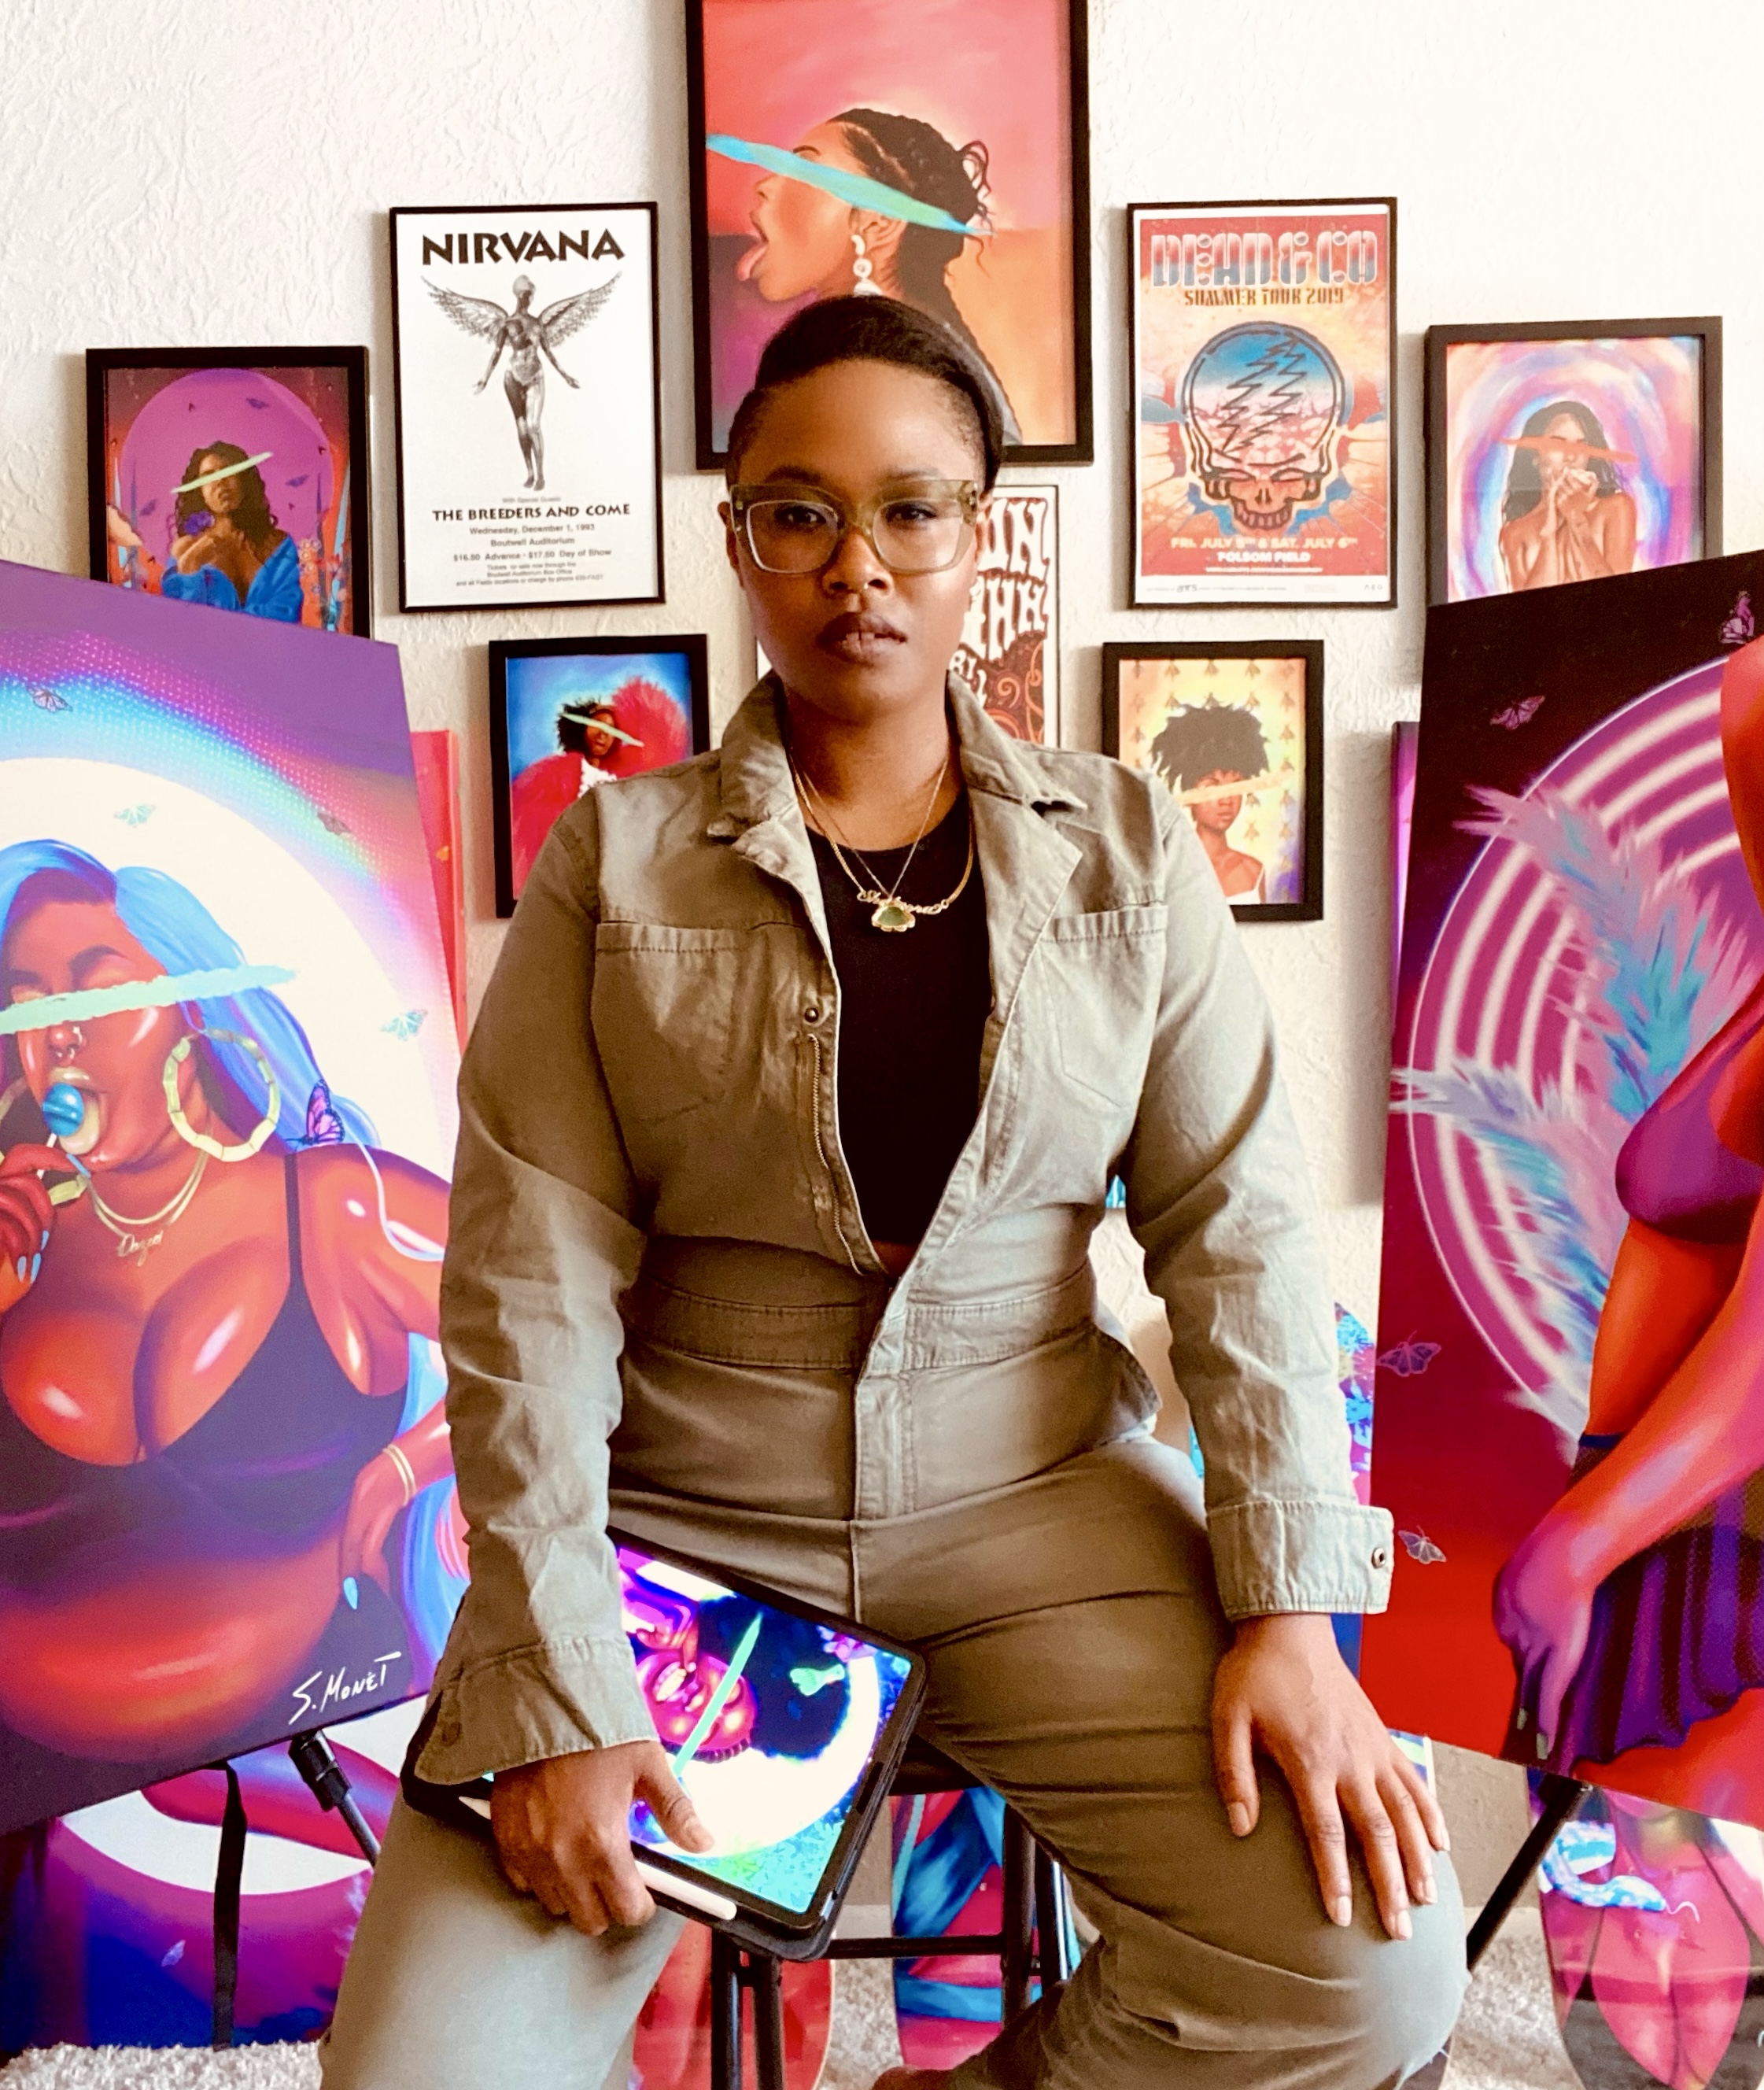 Contemporary artist S. Monét sitting on a stool in her art studio. She is sporting a jumpsuit, black t-shirt, and glasses, and has a serious look on her face. Behind her is colorful artwork hung on the wall and large canvases. 